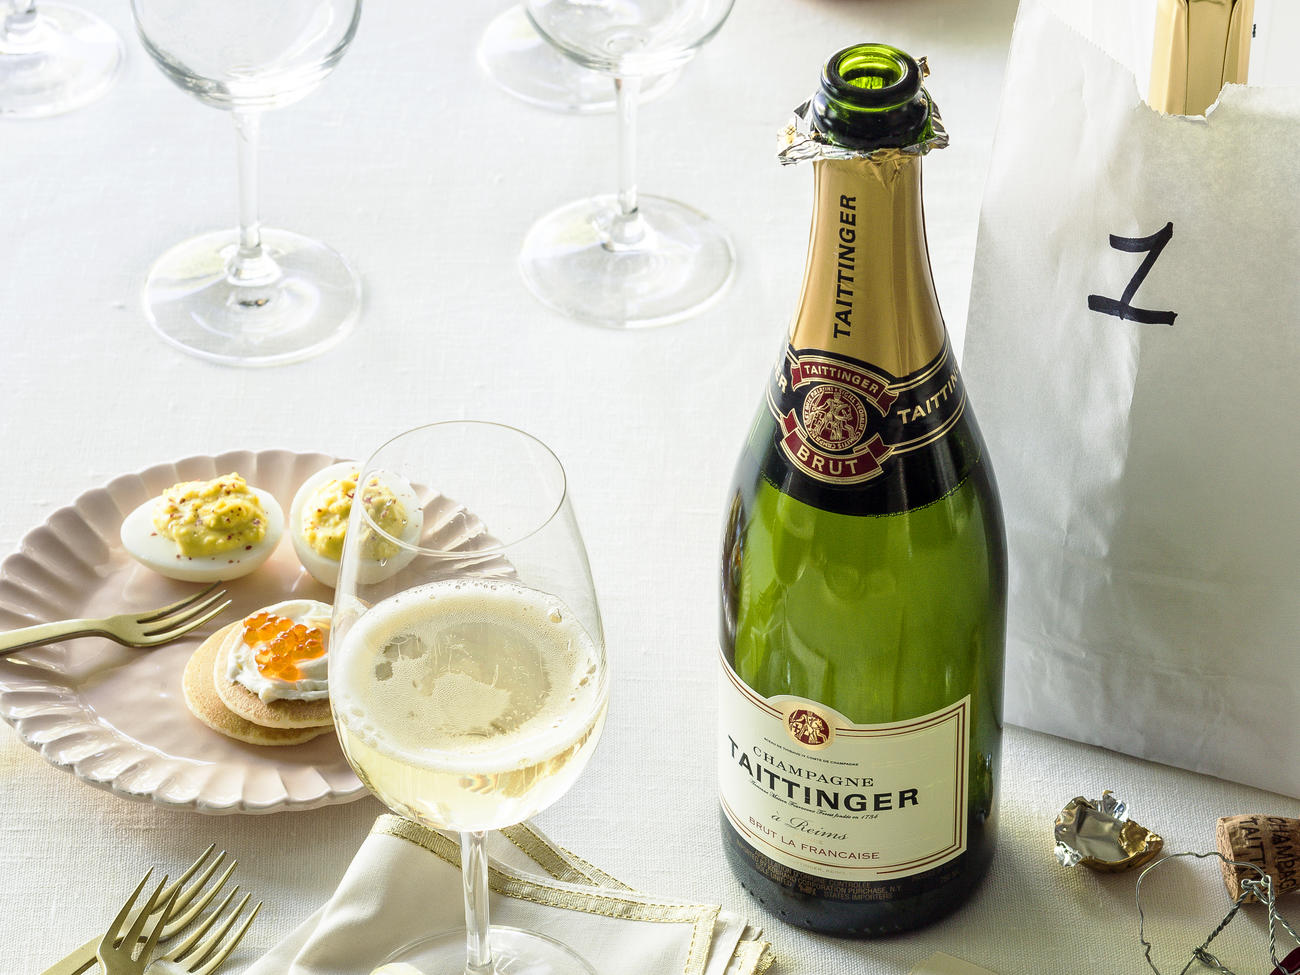 Sparkling Wine: Great with Food